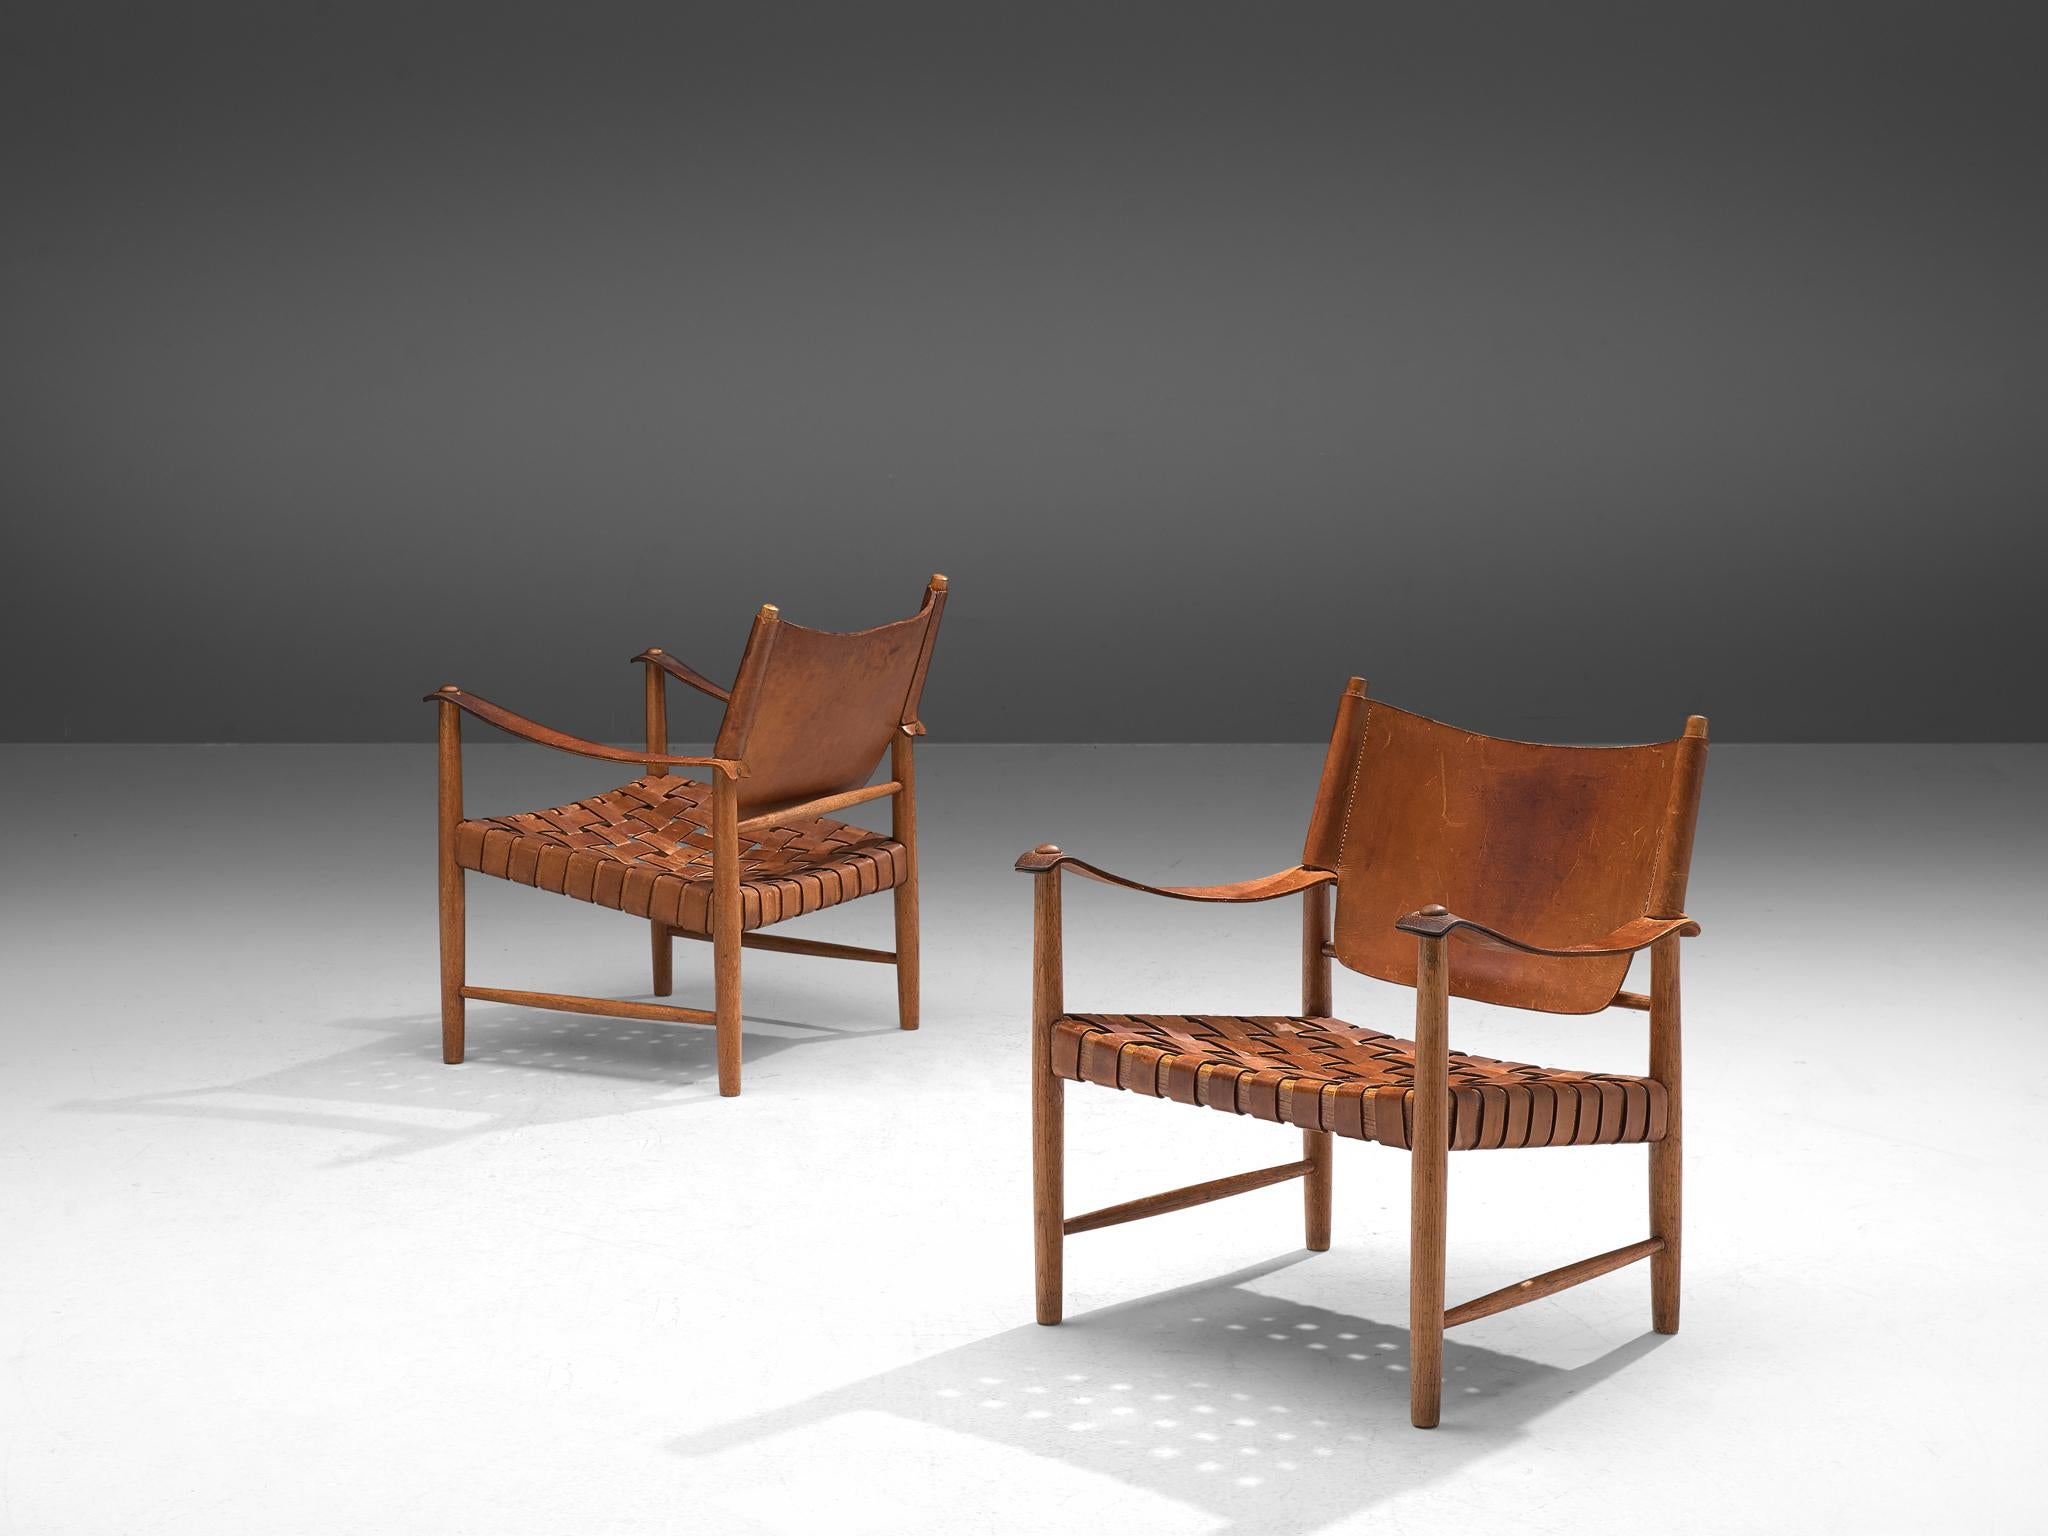 Safari chairs, patinated leather, beech, Denmark, 1950s. 

This elegant set safari chairs features wonderful patinated leather on both the seat, the arms and back. The patina creates a vibrant look which you can only achieve after years and years of